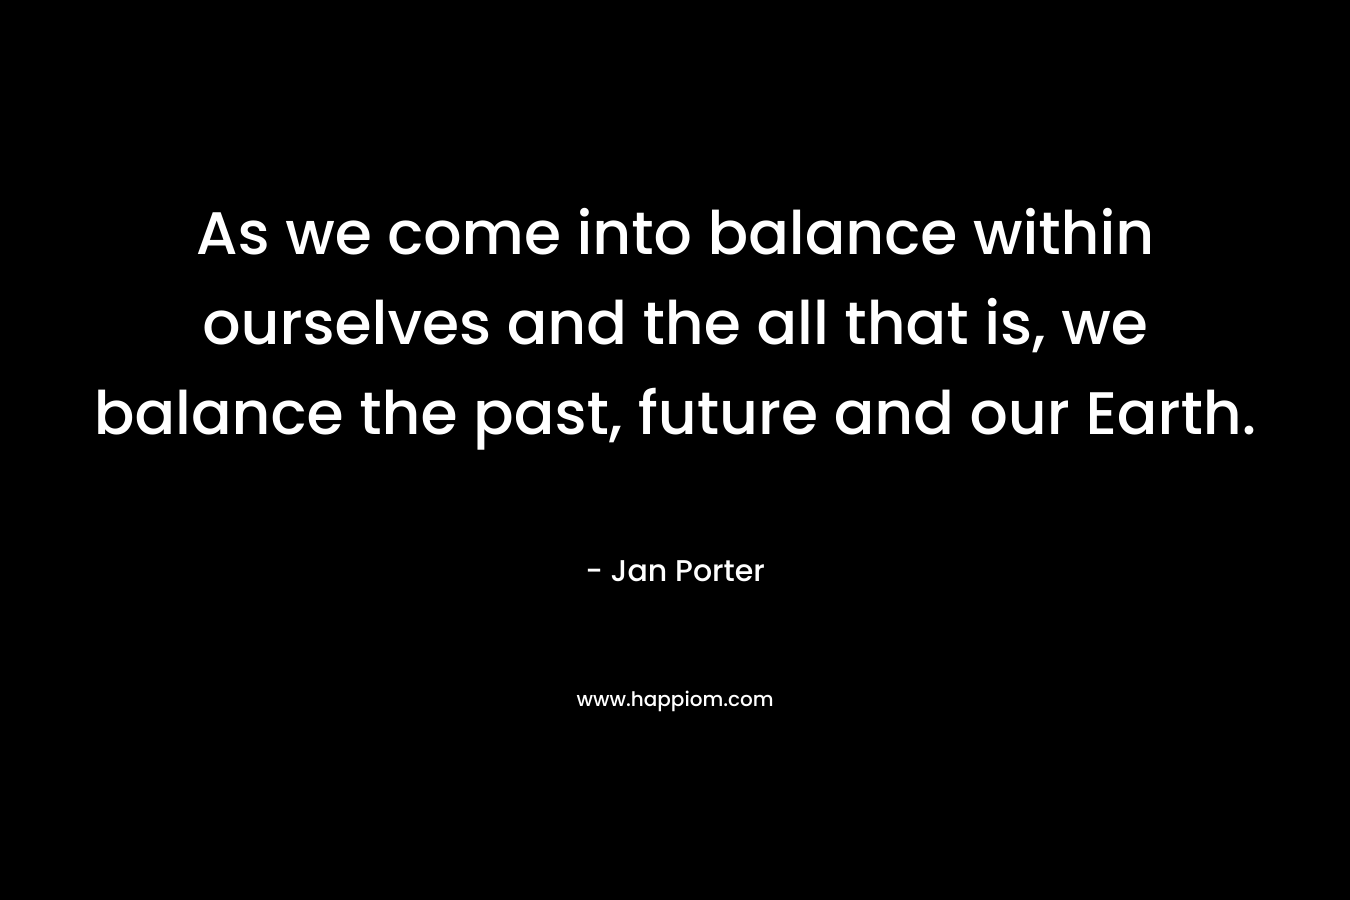 As we come into balance within ourselves and the all that is, we balance the past, future and our Earth.